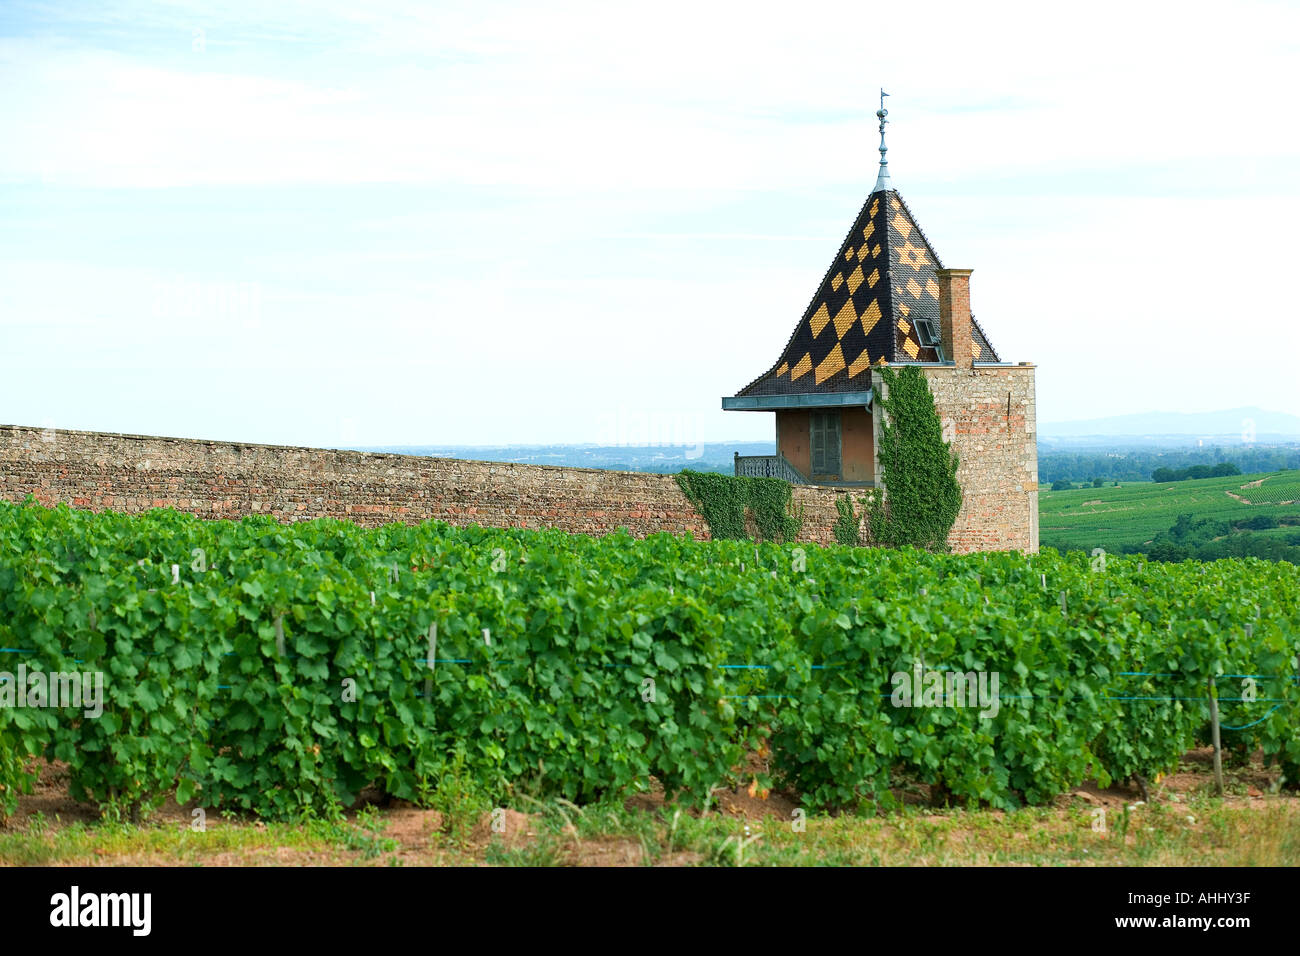 VINEYARD AND TOWER WITH POLYCHROMATIC GLAZED TILES ROOFING  MOULIN-A-VENT  BEAUJOLAIS WINE COUNTRY RHONE VALLEY FRANCE Stock Photo